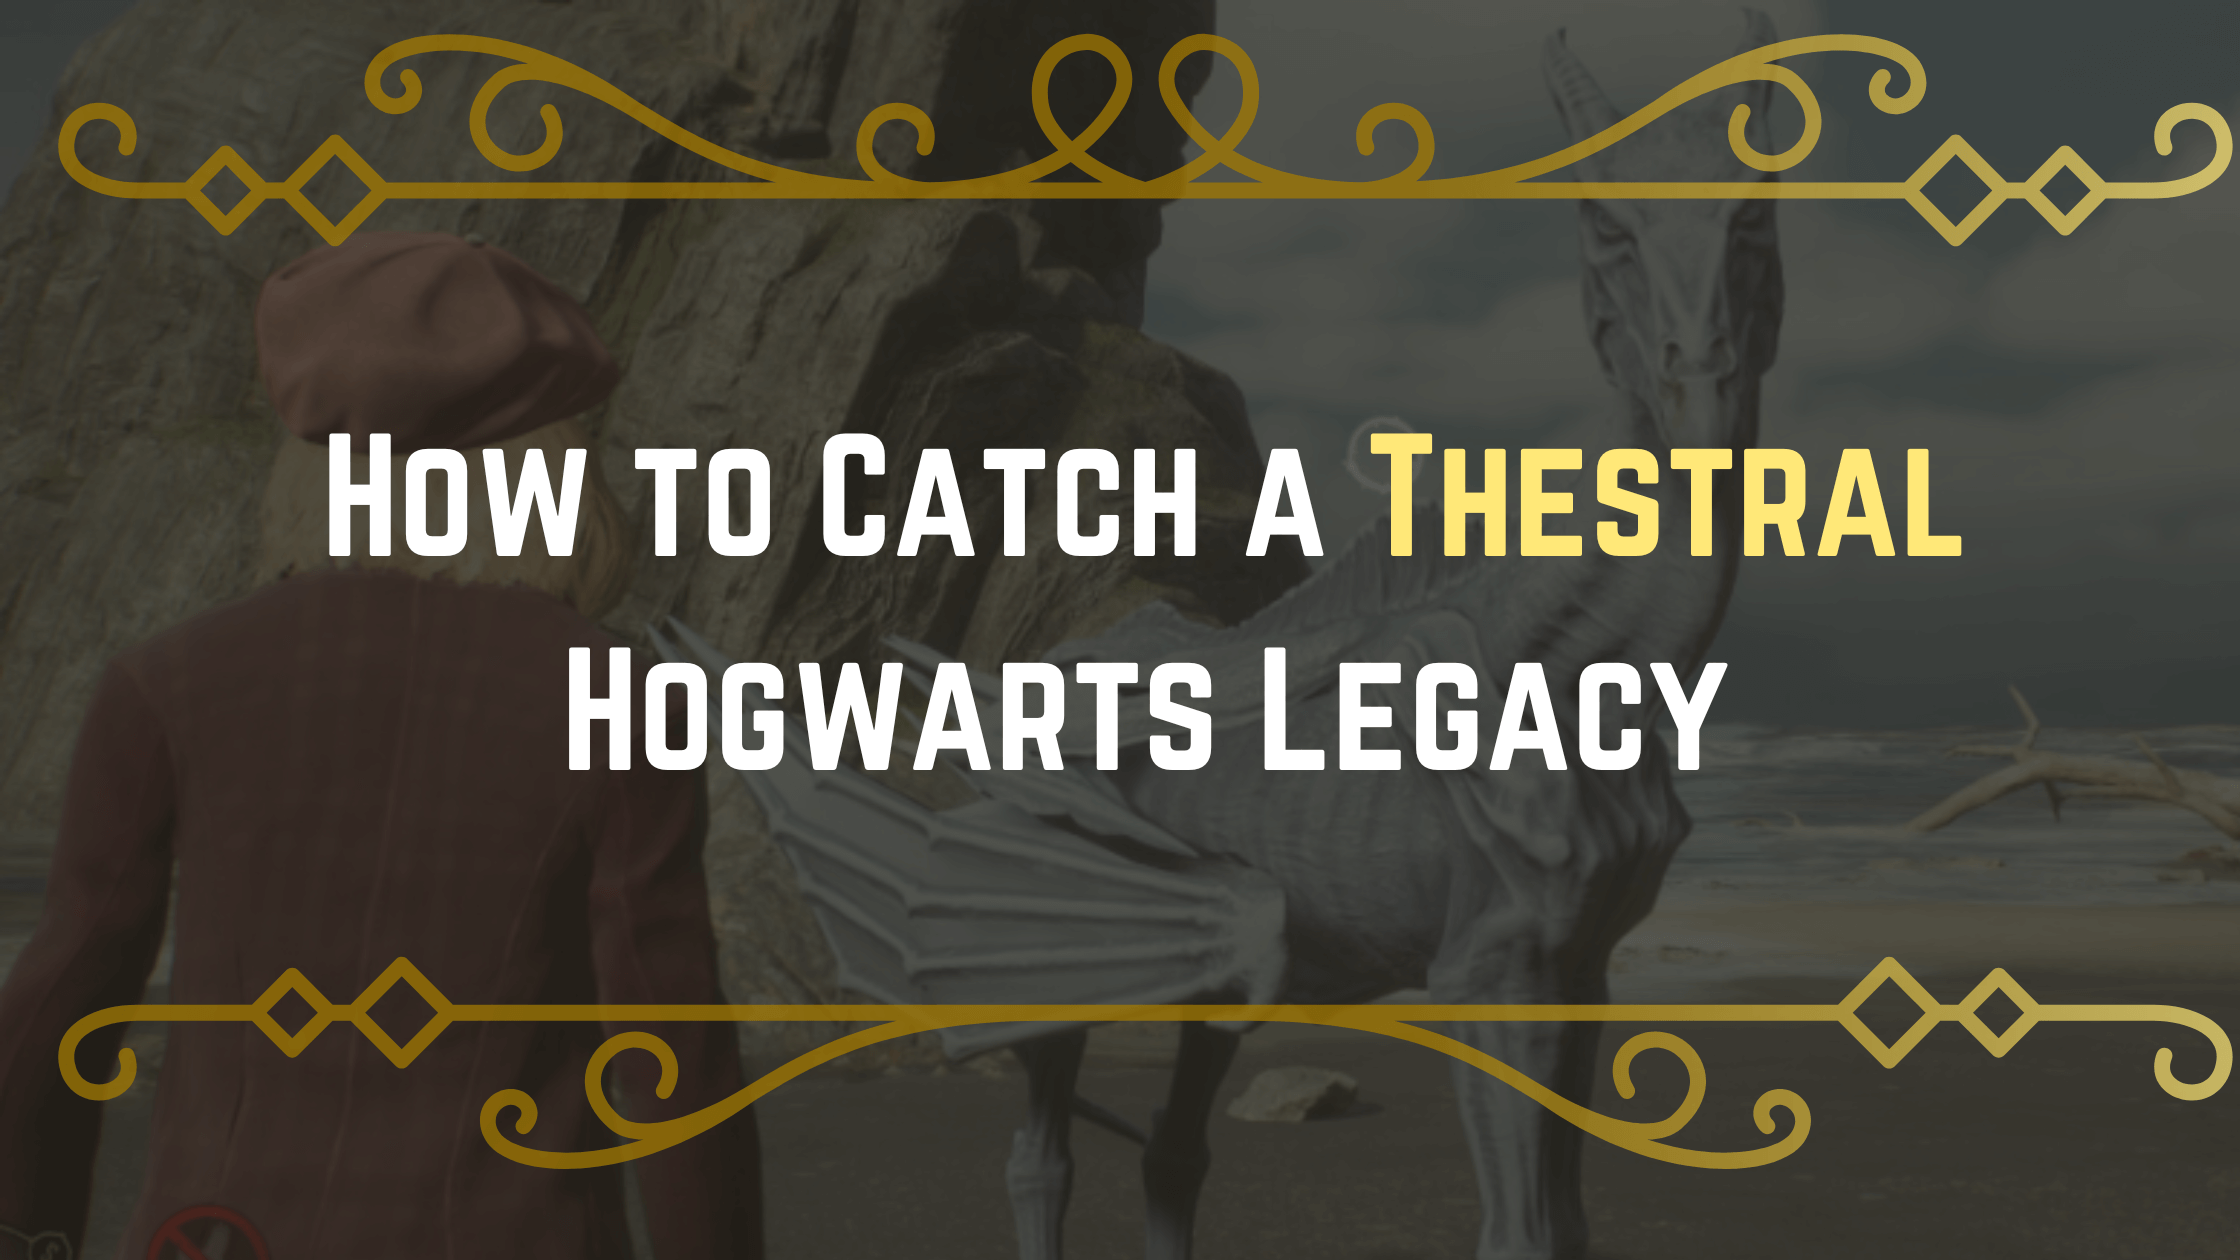 How to unlock Thestral Hogwarts Legacy